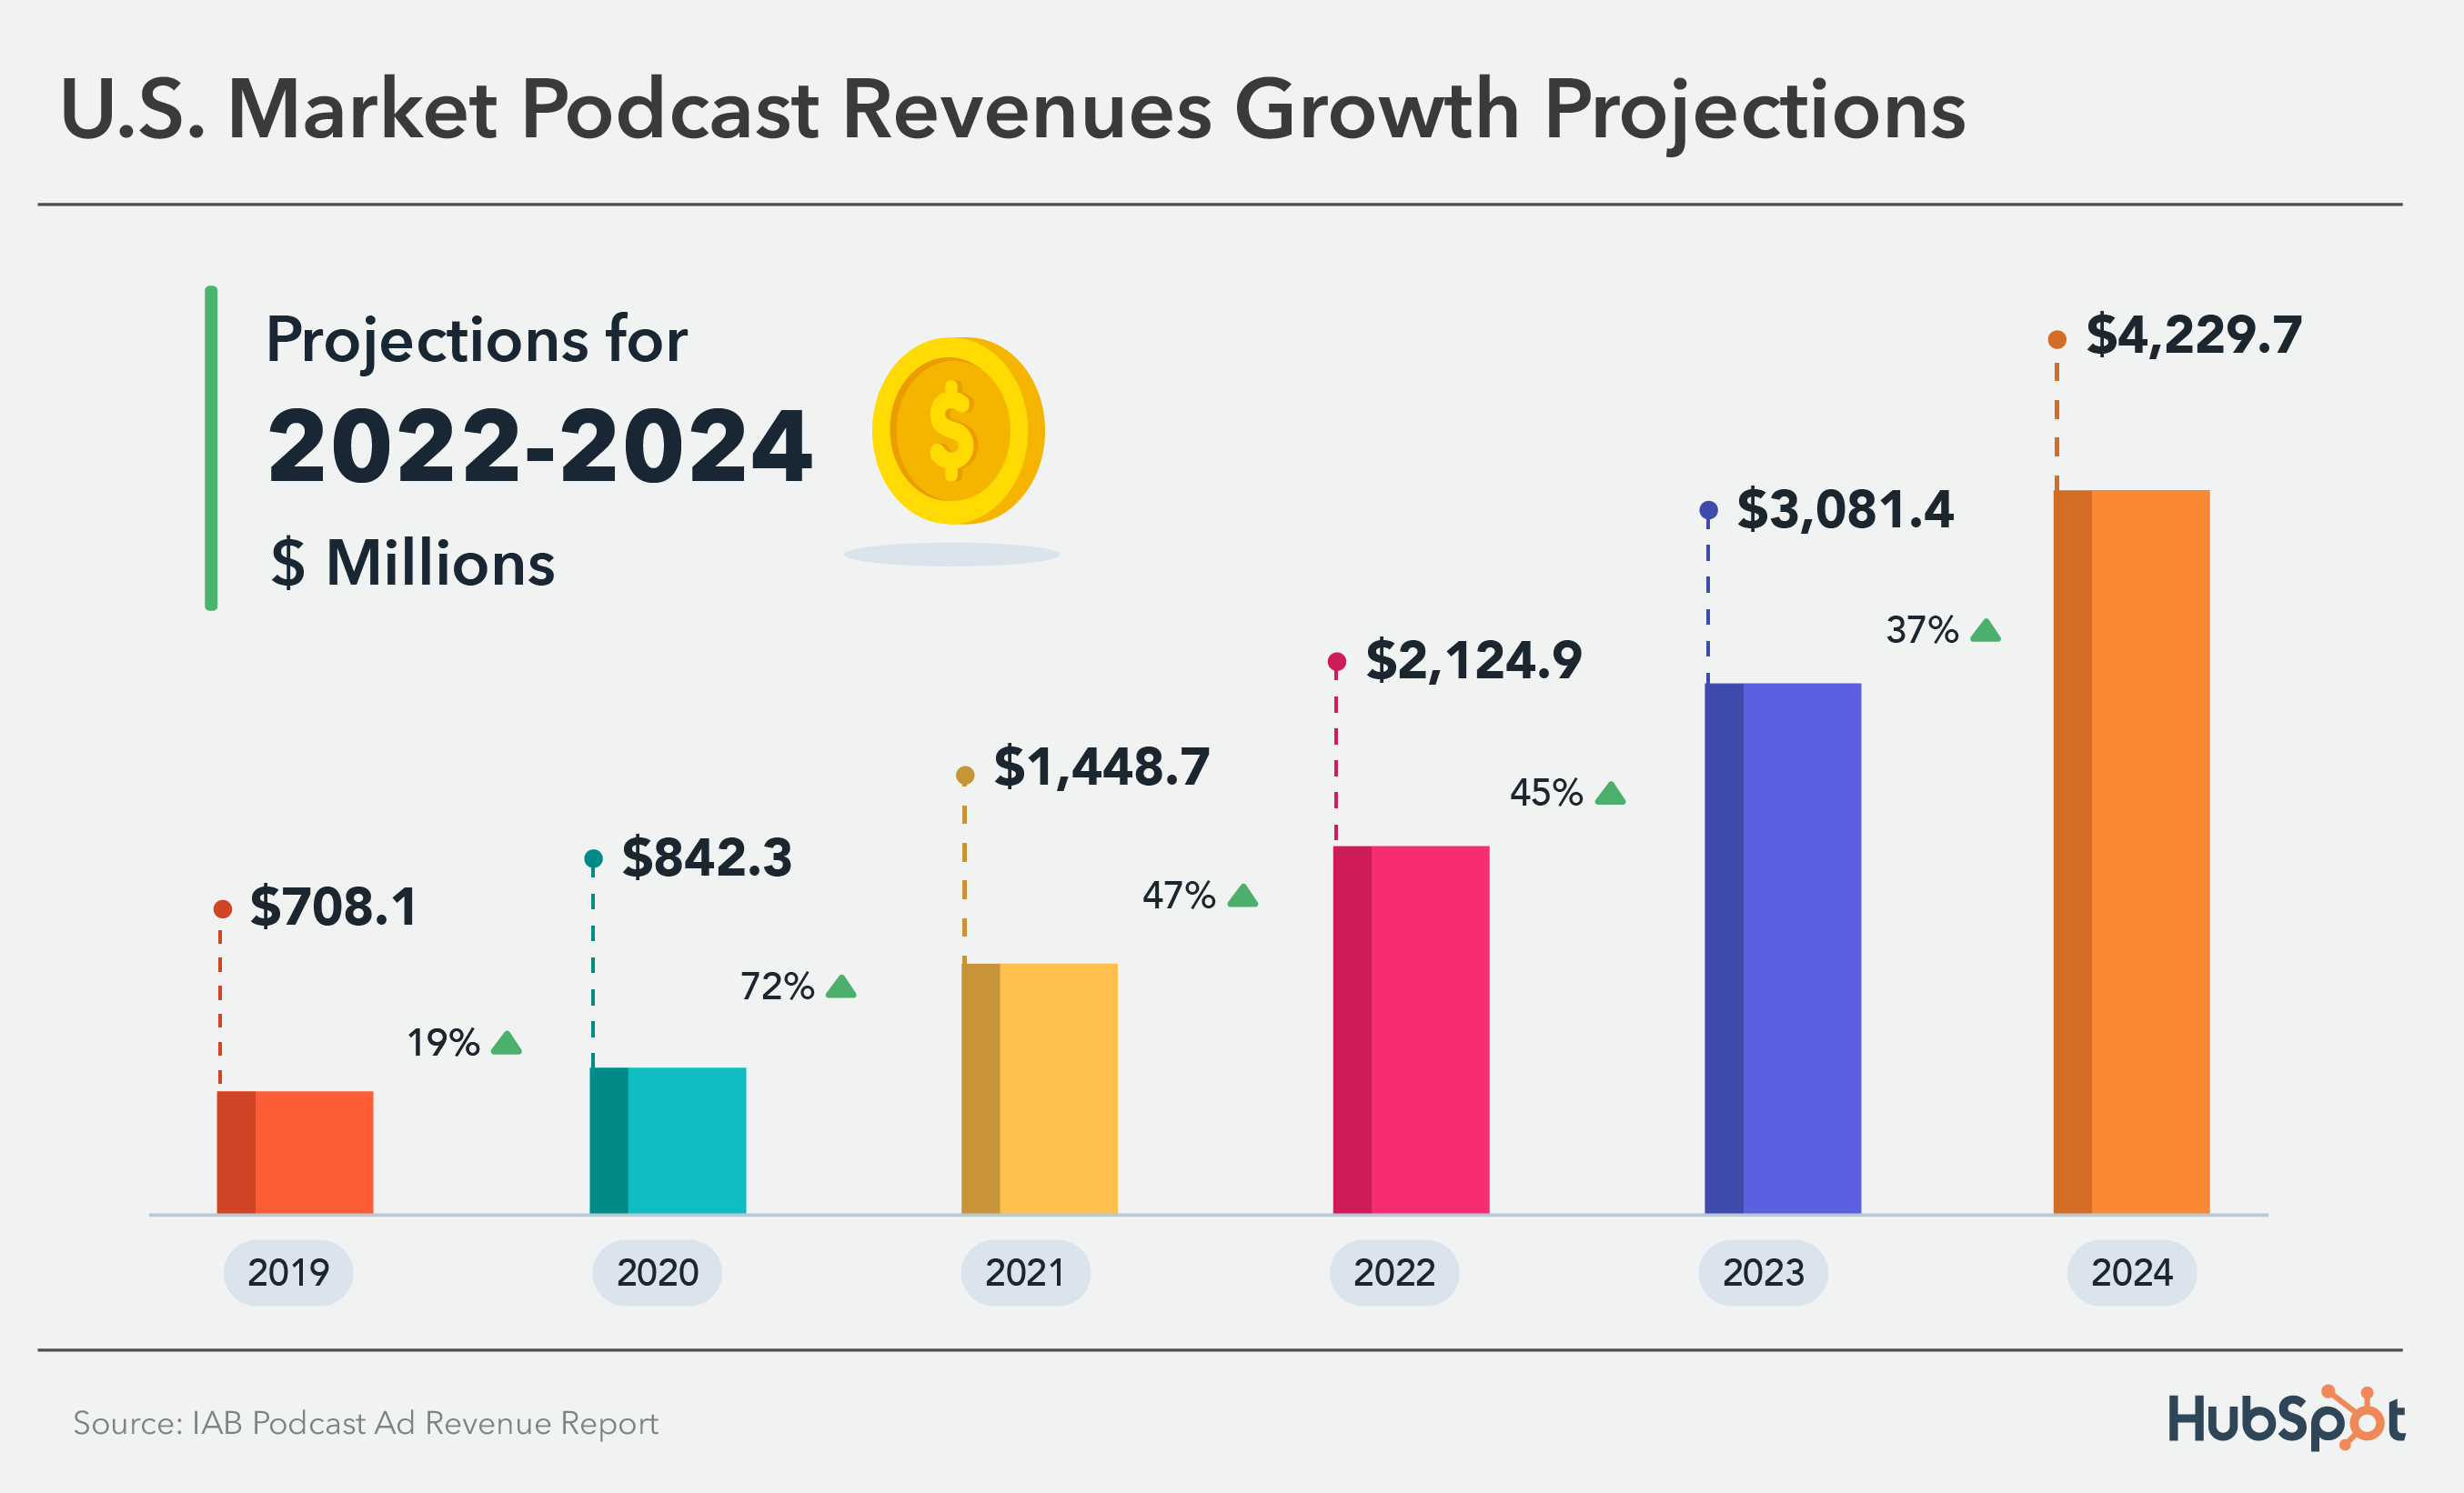 Podcast revenue growth projection